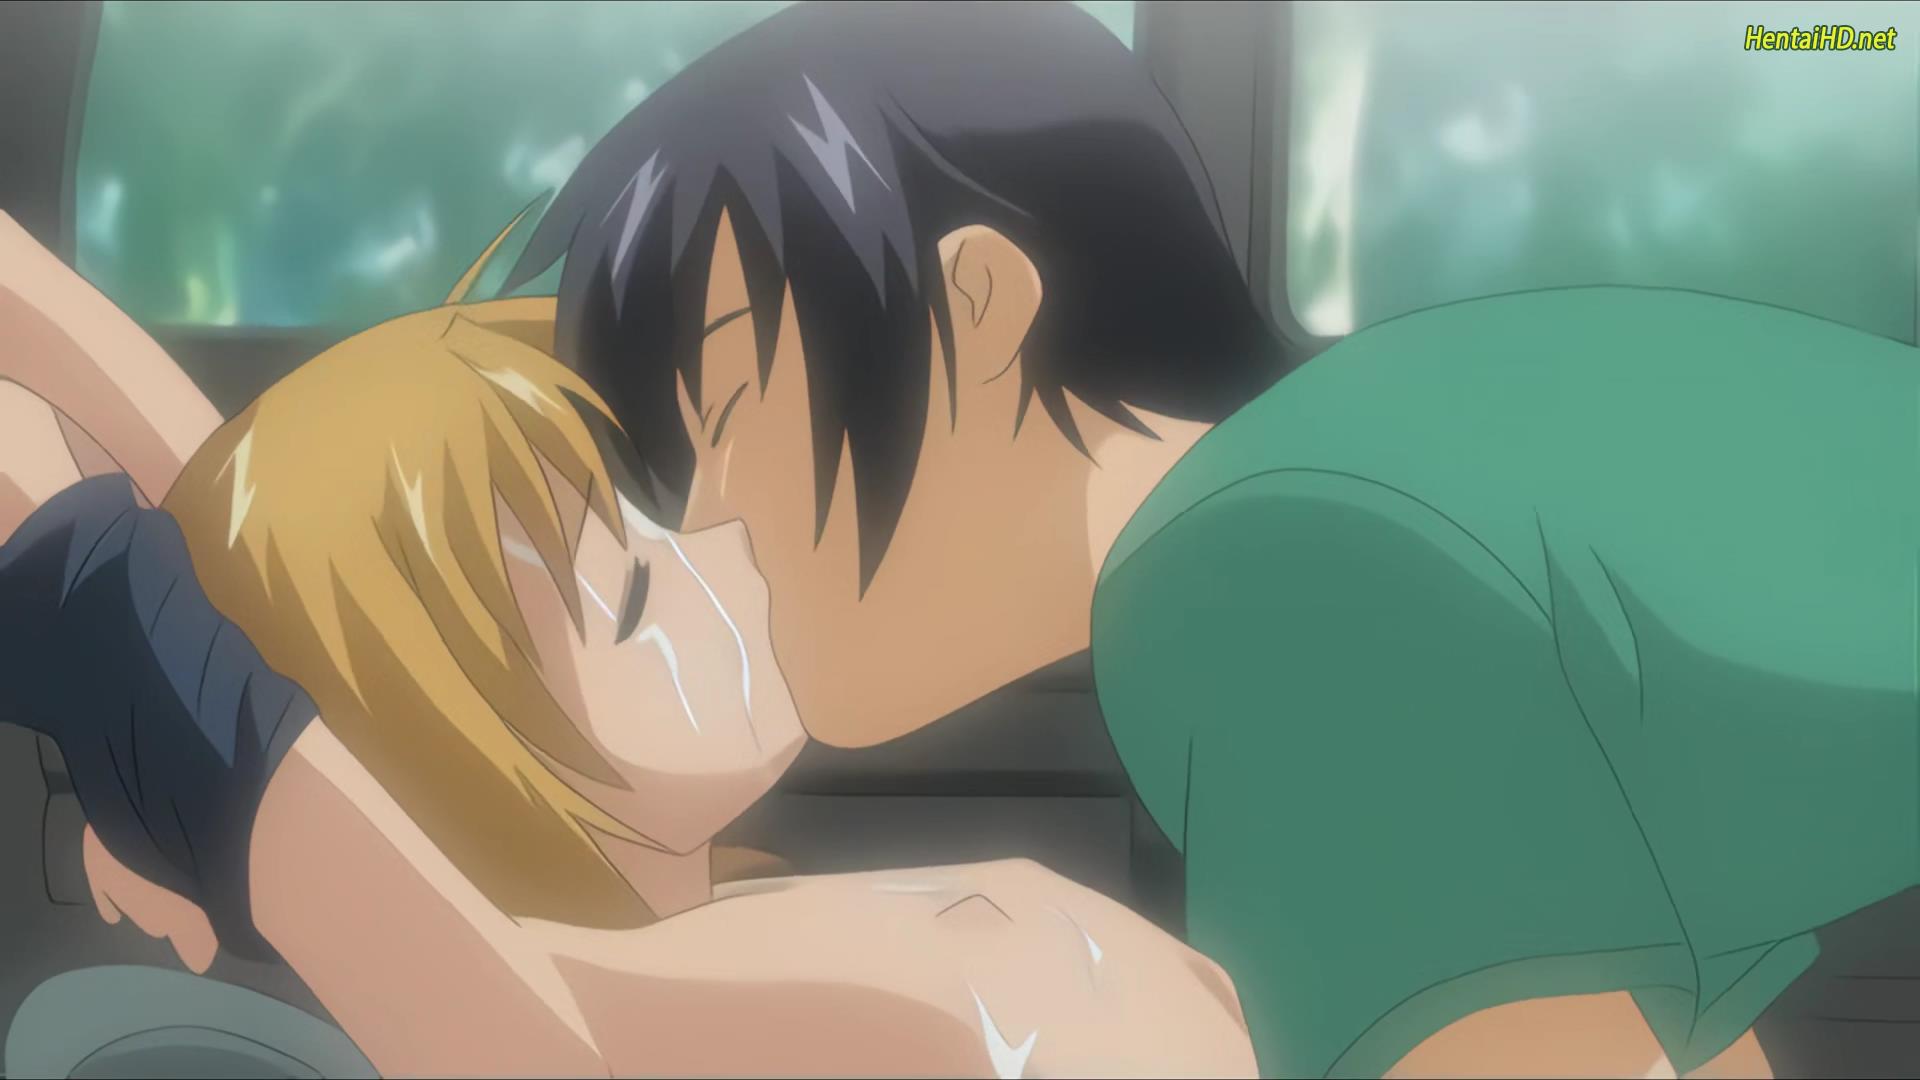 Watch hentai Boku no Pico - ぼくのぴこ Episode 1 Raw in HD quality for free |  HentaiHD.net